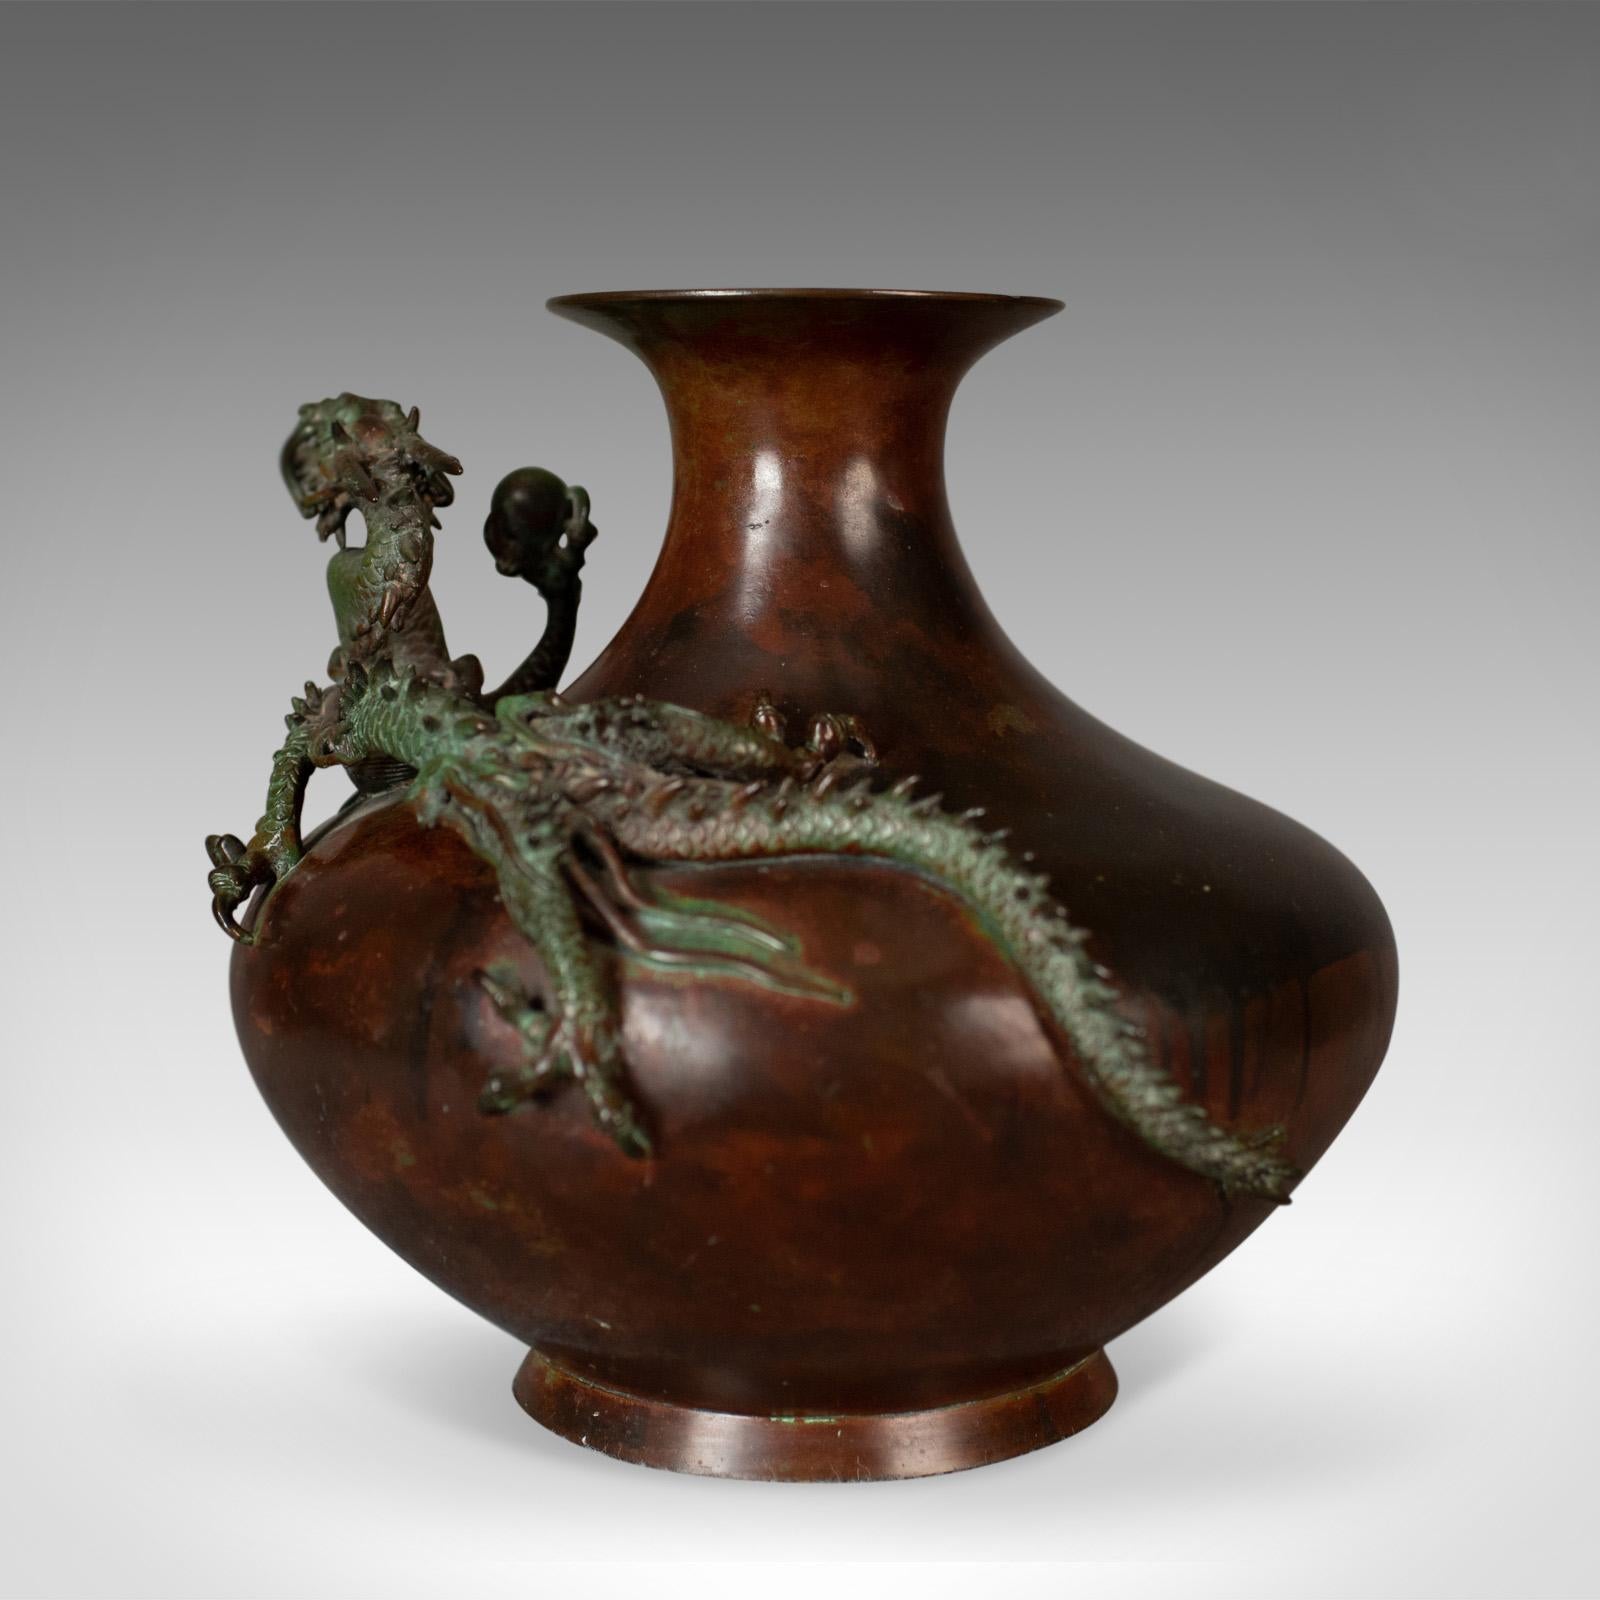 This is a Chinese urn or vase in bronze with a dragon and pearl mounted to the bowl a 20th century oriental centrepiece.

Superbly detailed bronze lithe dragon and pearl
The dragon displaying well in multiple hues
Mounted to the bowl of the urn